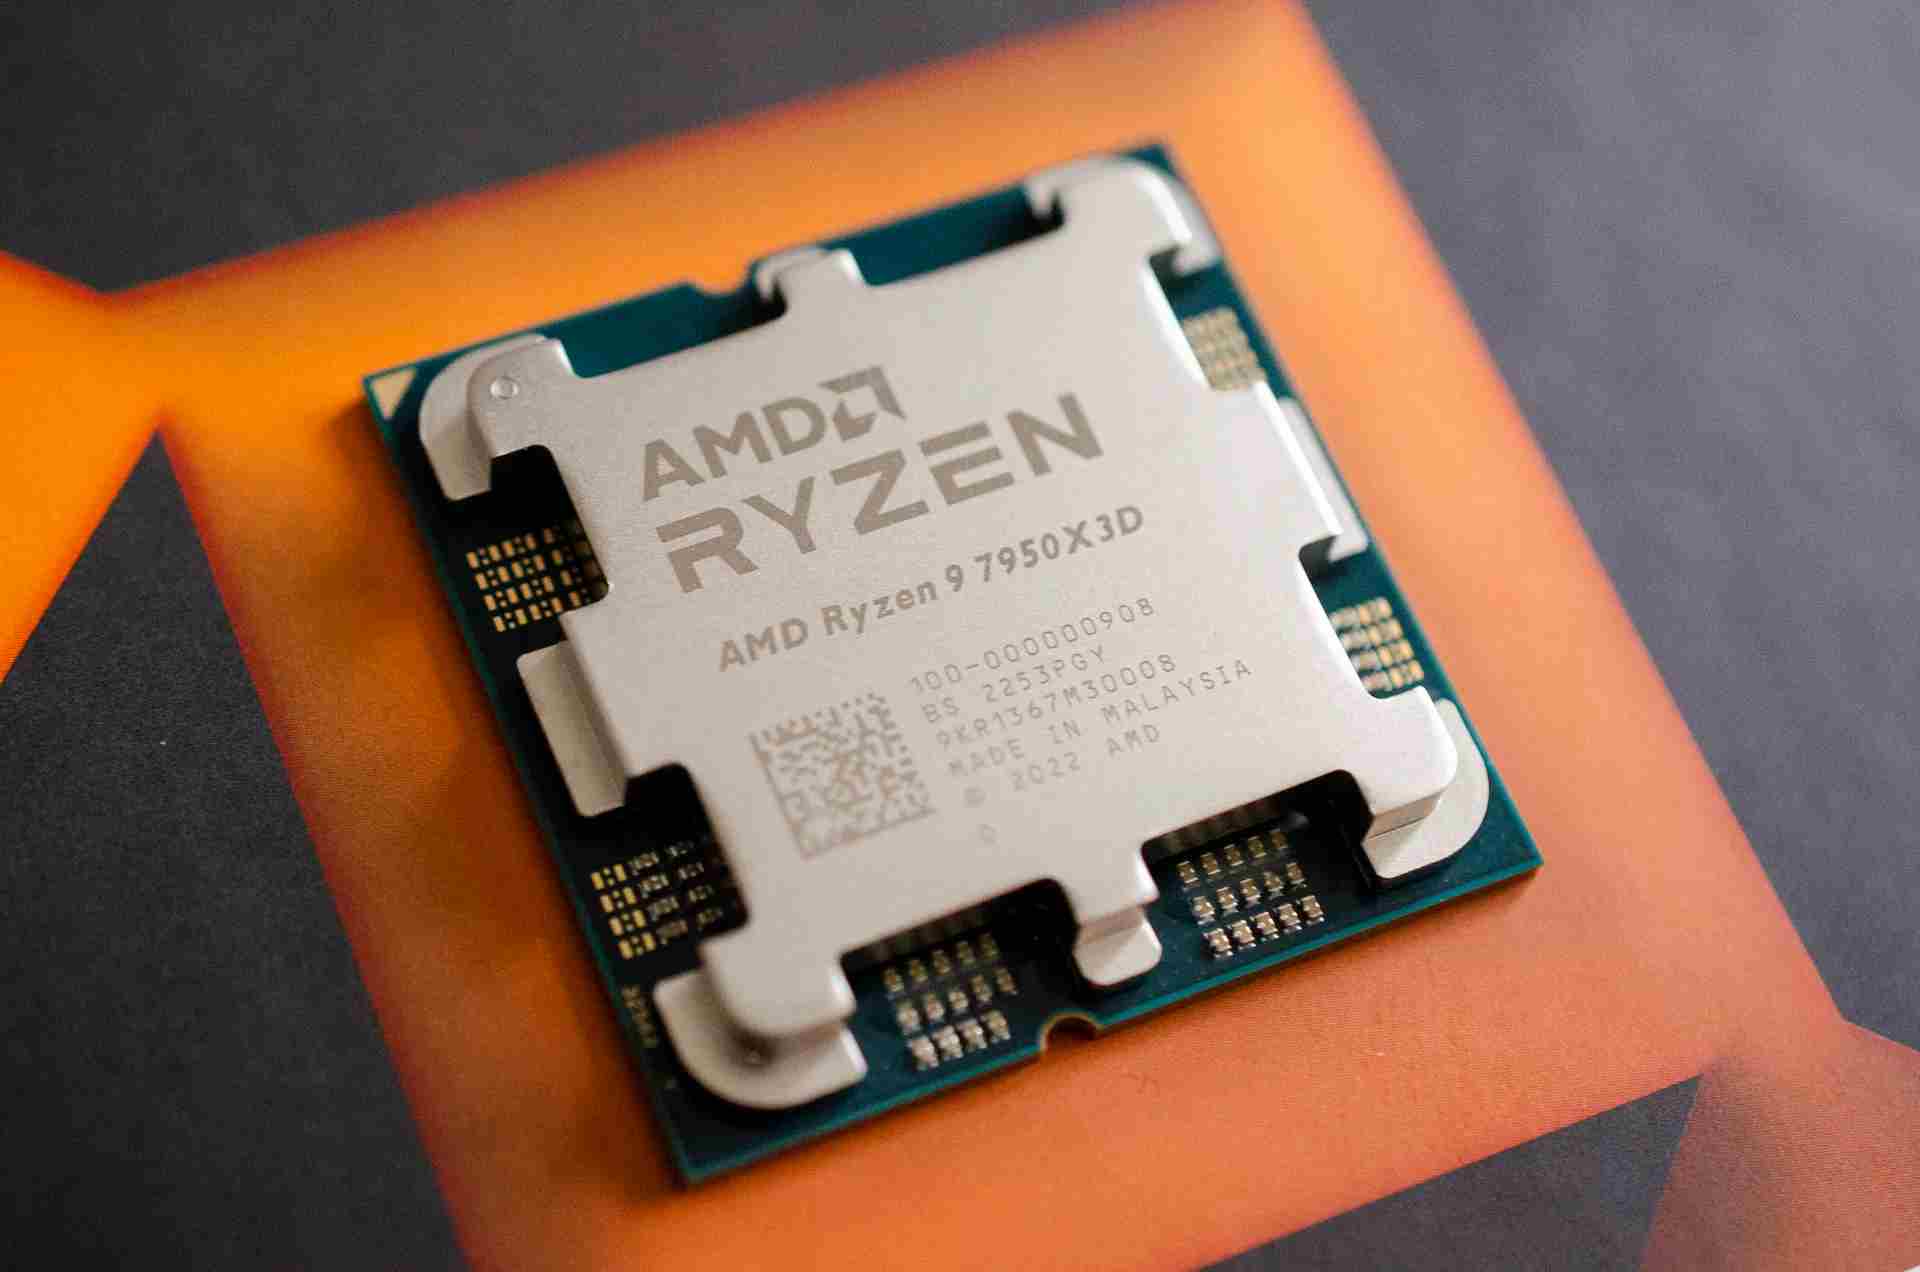 You are currently viewing AMD Ryzen 9 7950X3D